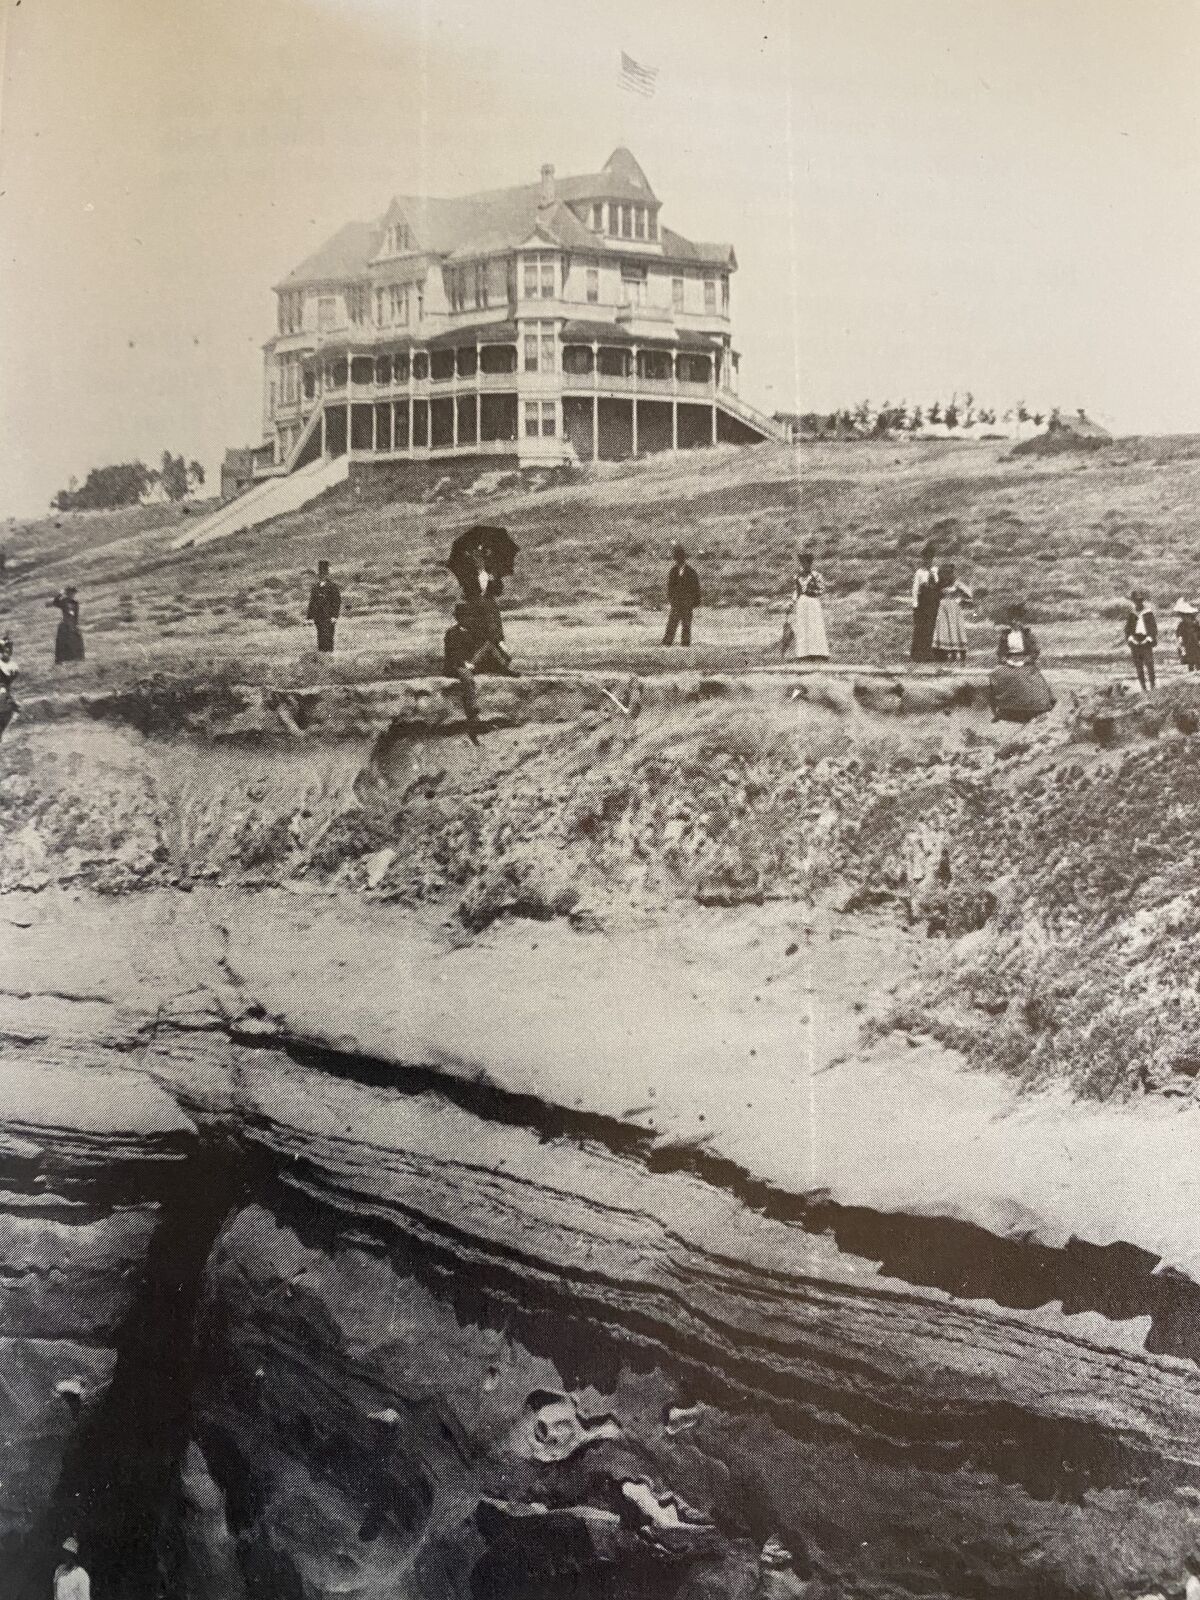 La Jolla Park Hotel, pictured in 1888, did not open until 1893.